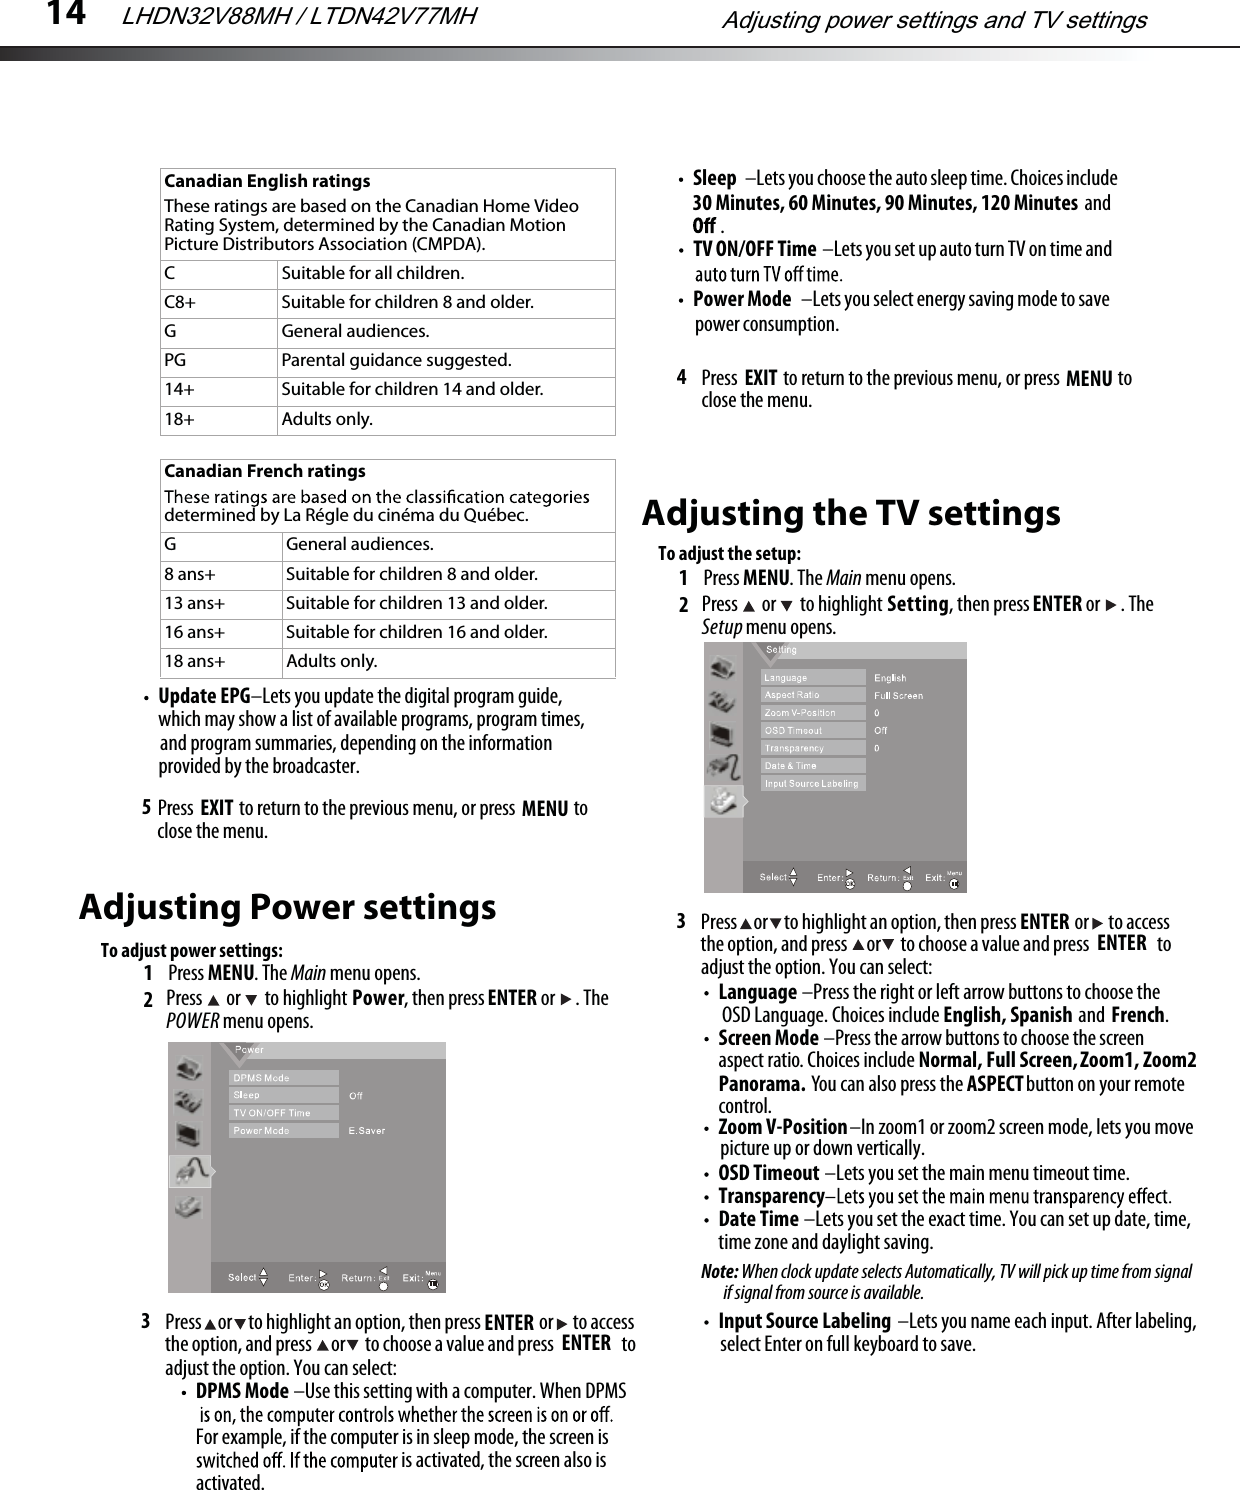 145Adjusting Power settingsTo adjust power settings:1Press MENU. The Main menu opens.23Language –Press the right or left arrow buttons to choose the OSD Language. Choices include English, Spanish and French.Screen Mode –Press the arrow buttons to choose the screen aspect ratio. Choices include Normal, Full Screen, Zoom1, Zoom2 Panorama. You can also press the ASPECT button on your remote control.DPMS Mode –Use this setting with a computer. When DPMSFor example, if the computer is in sleep mode, the screen is is activated, the screen also is activated.TV ON/OFF Time –Lets you set up auto turn TV on time and4Update EPG–Lets you update the digital program guide,which may show a list of available programs, program times,and program summaries, depending on the information provided by the broadcaster.  Press  MENU to return to the previous menu, or press EXIT  to close the menu.Press   or   to highlight Power, then press ENTER or  . The POWER menu opens.Press     or     to highlight an option, then press                  or      to accessthe option, and press      or      to choose a value and press                     to adjust the option. You can select:ENTERSleep –Lets you choose the auto sleep time. Choices includeENTER30 Minutes, 60 Minutes, 90 Minutes, 120 Minutes and.Power Mode –Lets you select energy saving mode to savepower consumption. Press  MENU to return to the previous menu, or press EXIT  to close the menu.Adjusting the TV settingsTo adjust the setup:1Press MENU. The Main menu opens.23Press   or   to highlight Setting, then press ENTER or  . The Setup menu opens.Press     or     to highlight an option, then press                  or      to accessthe option, and press      or      to choose a value and press                     to adjust the option. You can select:ENTER ENTERZoom V-Position–In zoom1 or zoom2 screen mode, lets you movepicture up or down vertically.OSD Timeout –Lets you set the main menu timeout time.TransparencyDate Time –Lets you set the exact time. You can set up date, time,time zone and daylight saving.Note: When clock update selects Automatically, TV will pick up time from signalif signal from source is available.Input Source Labeling –Lets you name each input. After labeling, select Enter on full keyboard to save.Canadian French ratingsdetermined by La Régle du cinéma du Québec.G General audiences.8 ans+ Suitable for children 8 and older.13 ans+ Suitable for children 13 and older.16 ans+ Suitable for children 16 and older.18 ans+ Adults only.Canadian English ratingsThese ratings are based on the Canadian Home Video Rating System, determined by the Canadian Motion Picture Distributors Association (CMPDA).C Suitable for all children.C8+ Suitable for children 8 and older.G General audiences.PG Parental guidance suggested.14+ Suitable for children 14 and older.18+ Adults only.Adjusting power settings and TV settingsLHDN32V88MH / LTDN42V77MH